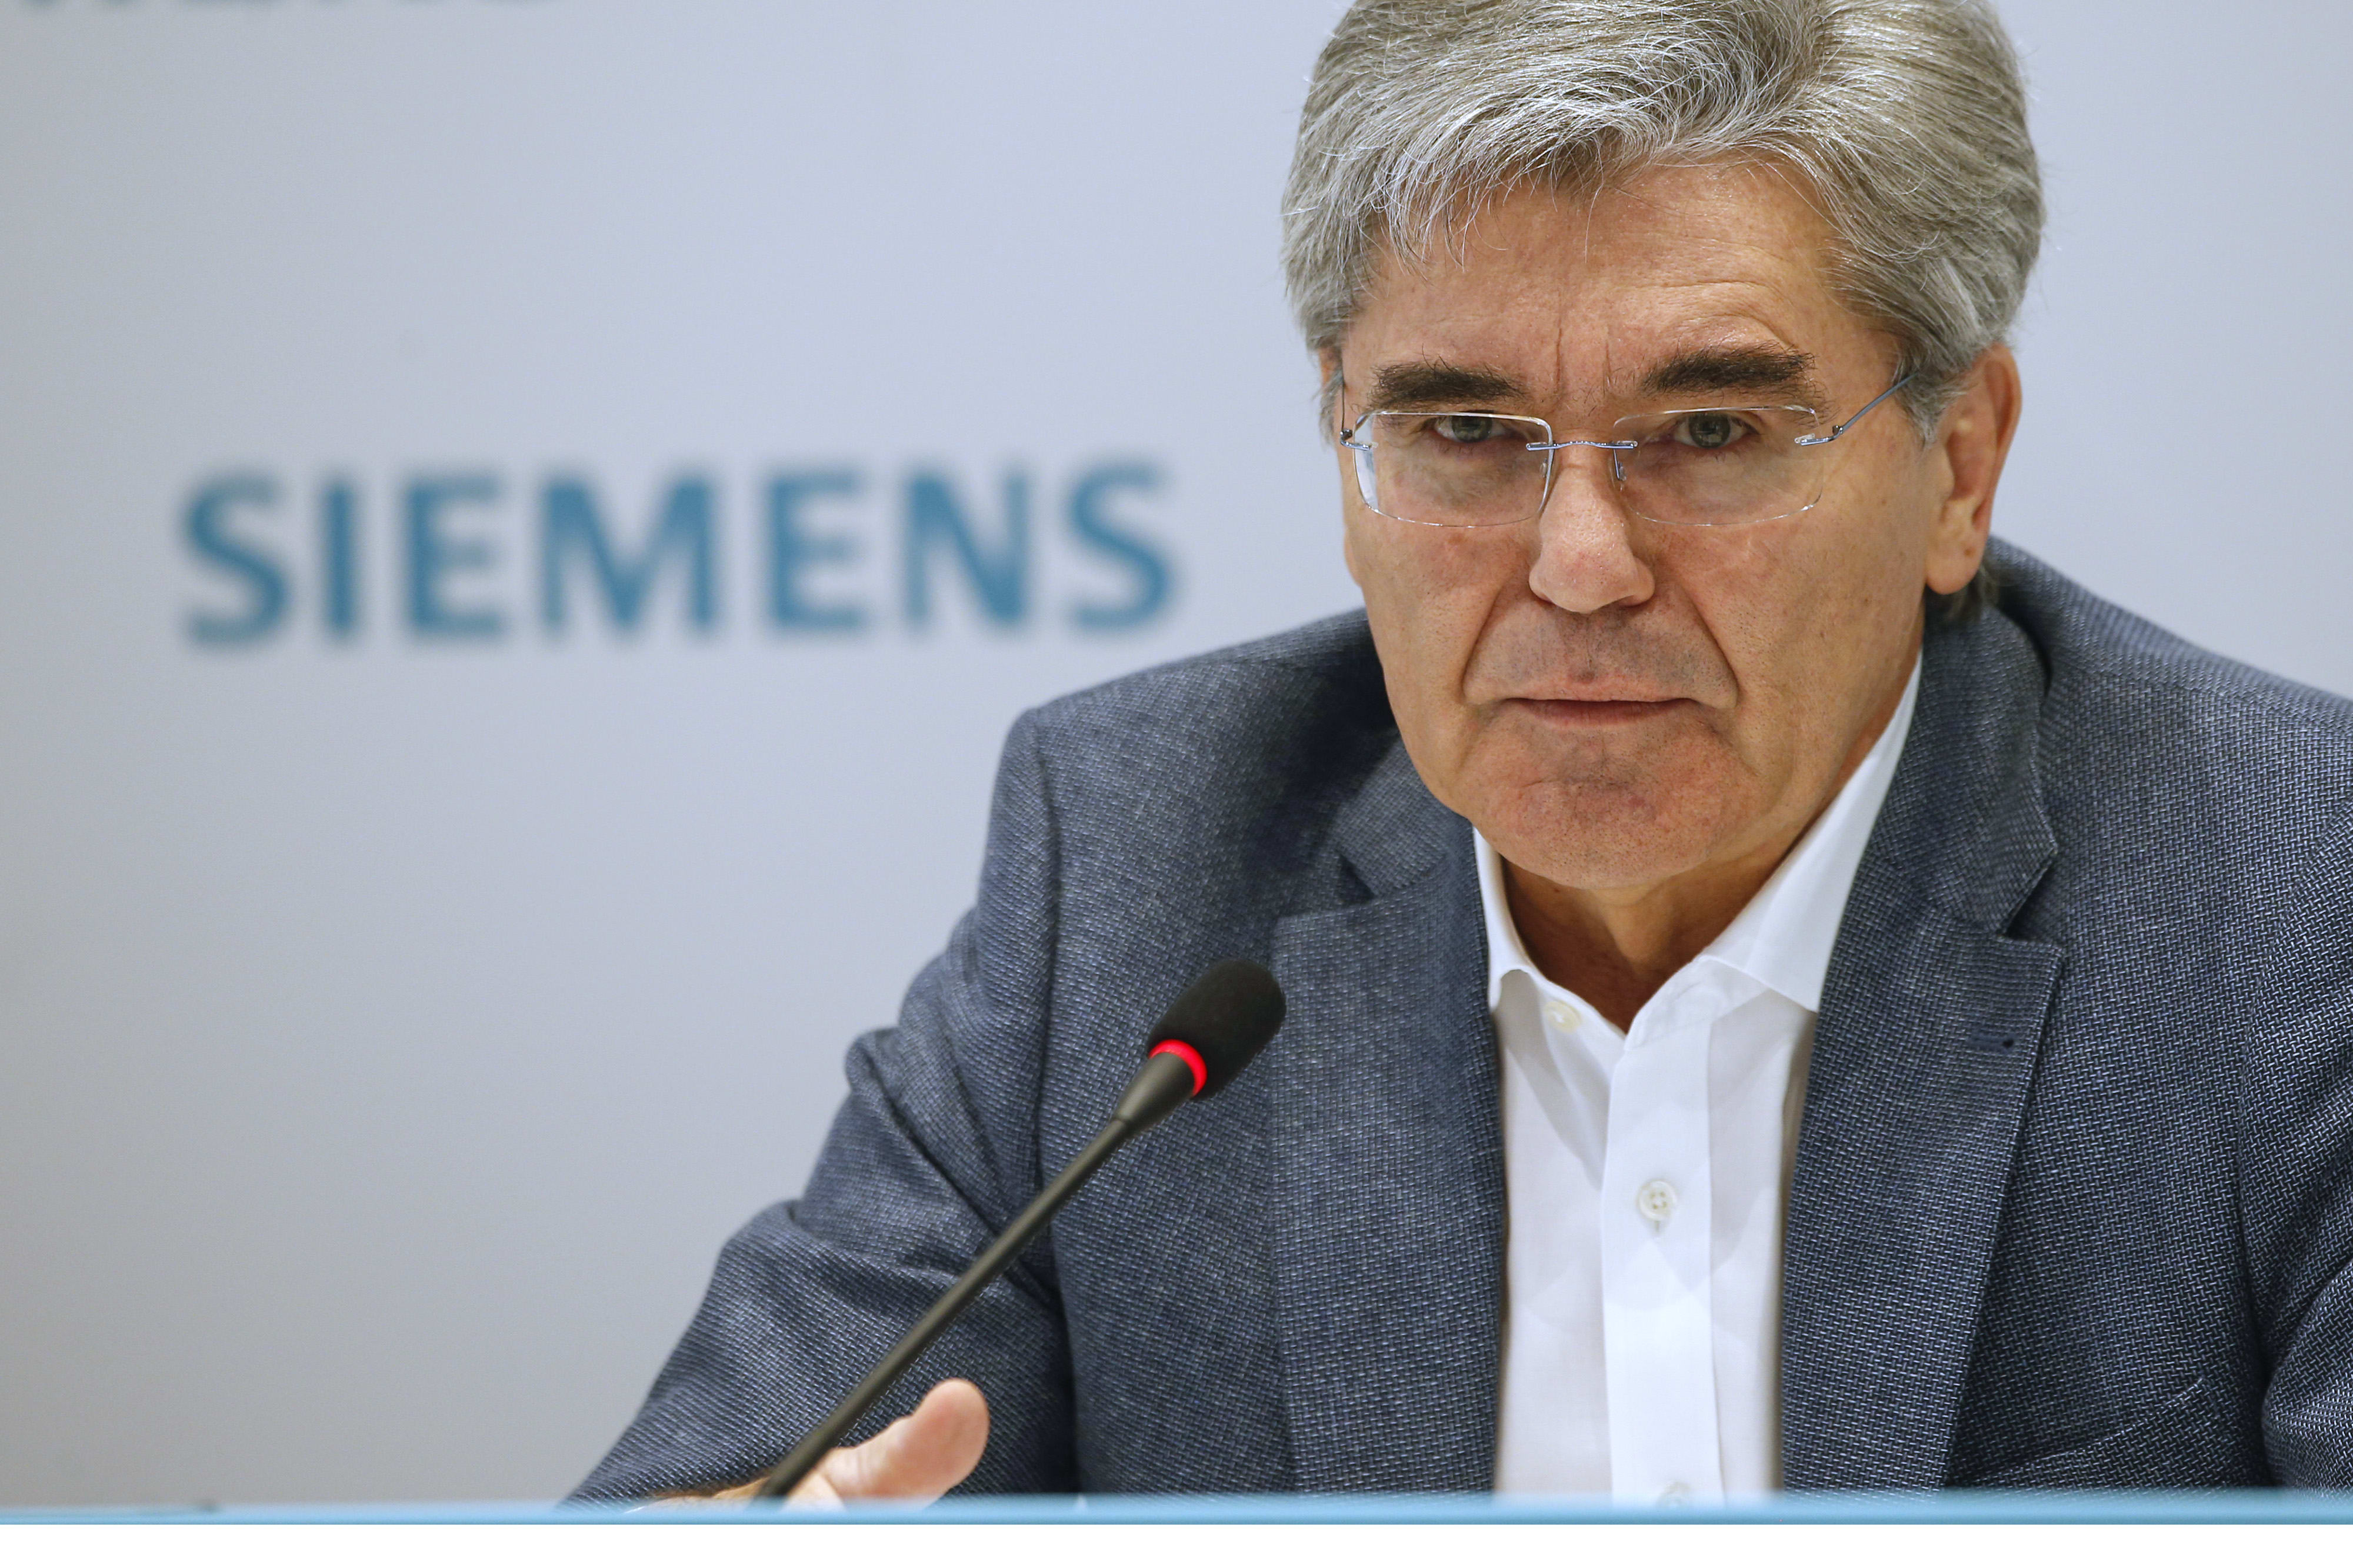 China has managed to recover 'very, very quickly,' Siemens CEO says